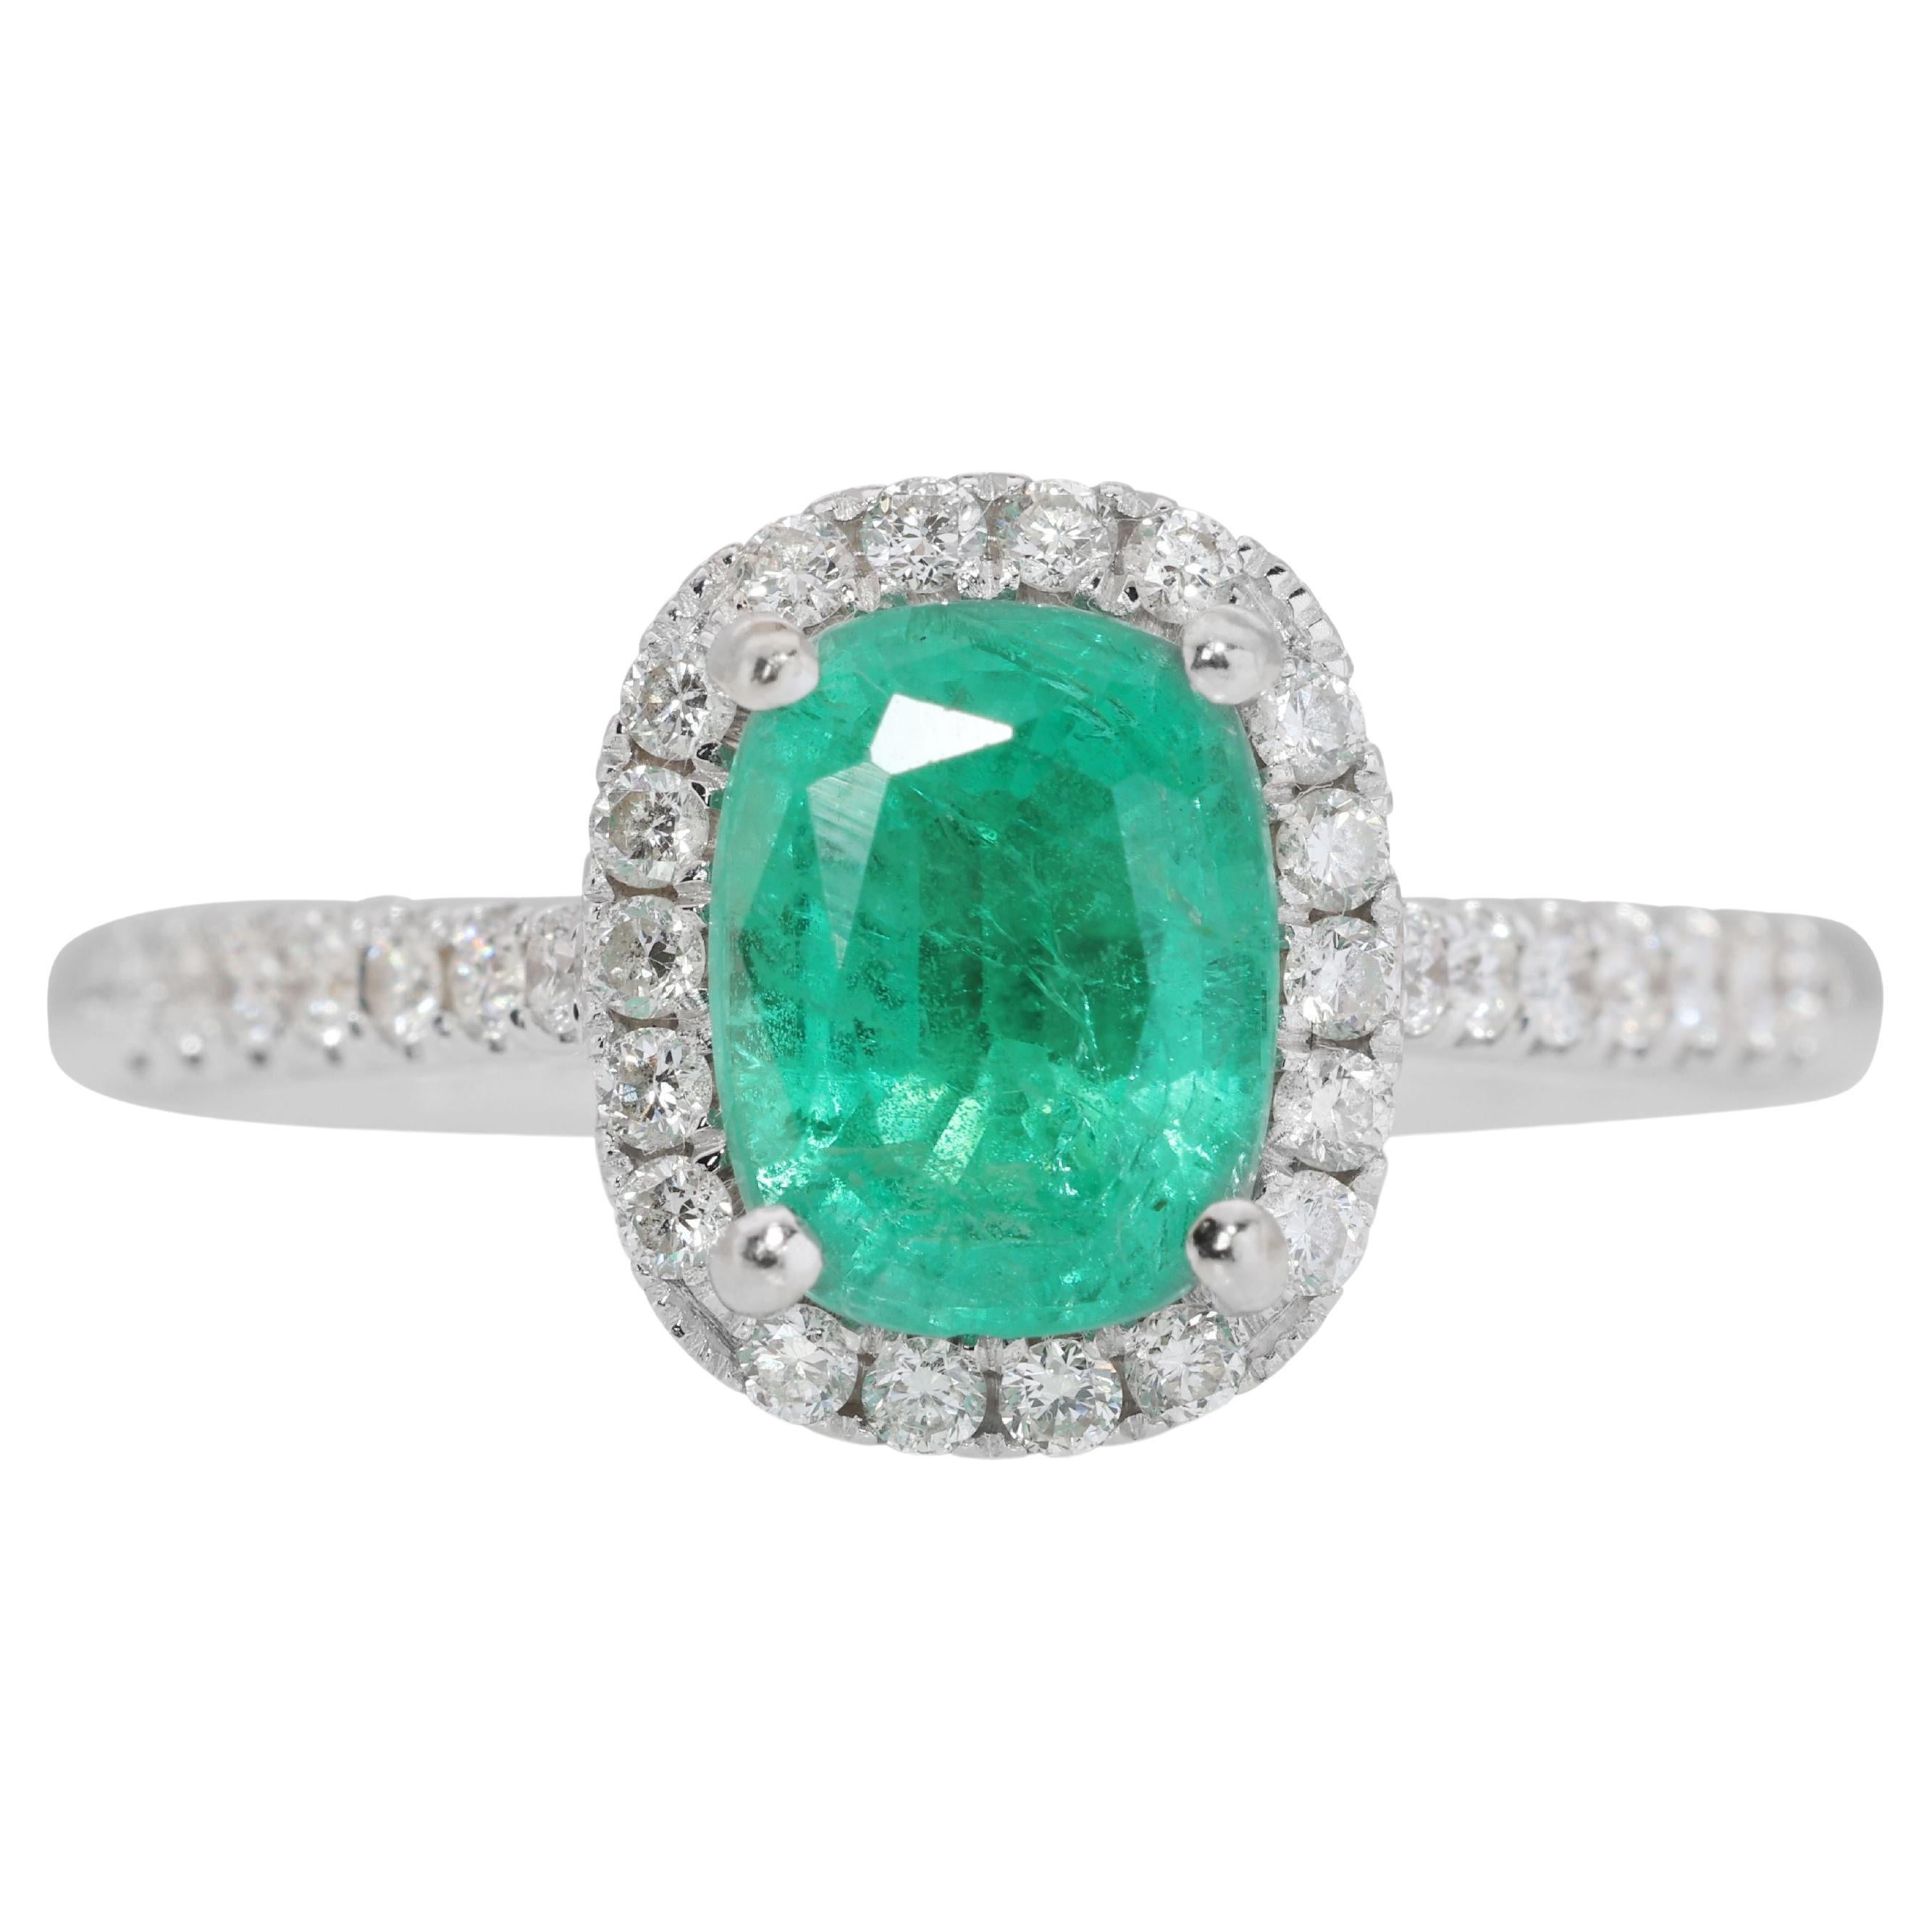 Captivating 0.69ct Emerald Ring with 0.29ct Diamond Side Stones For Sale